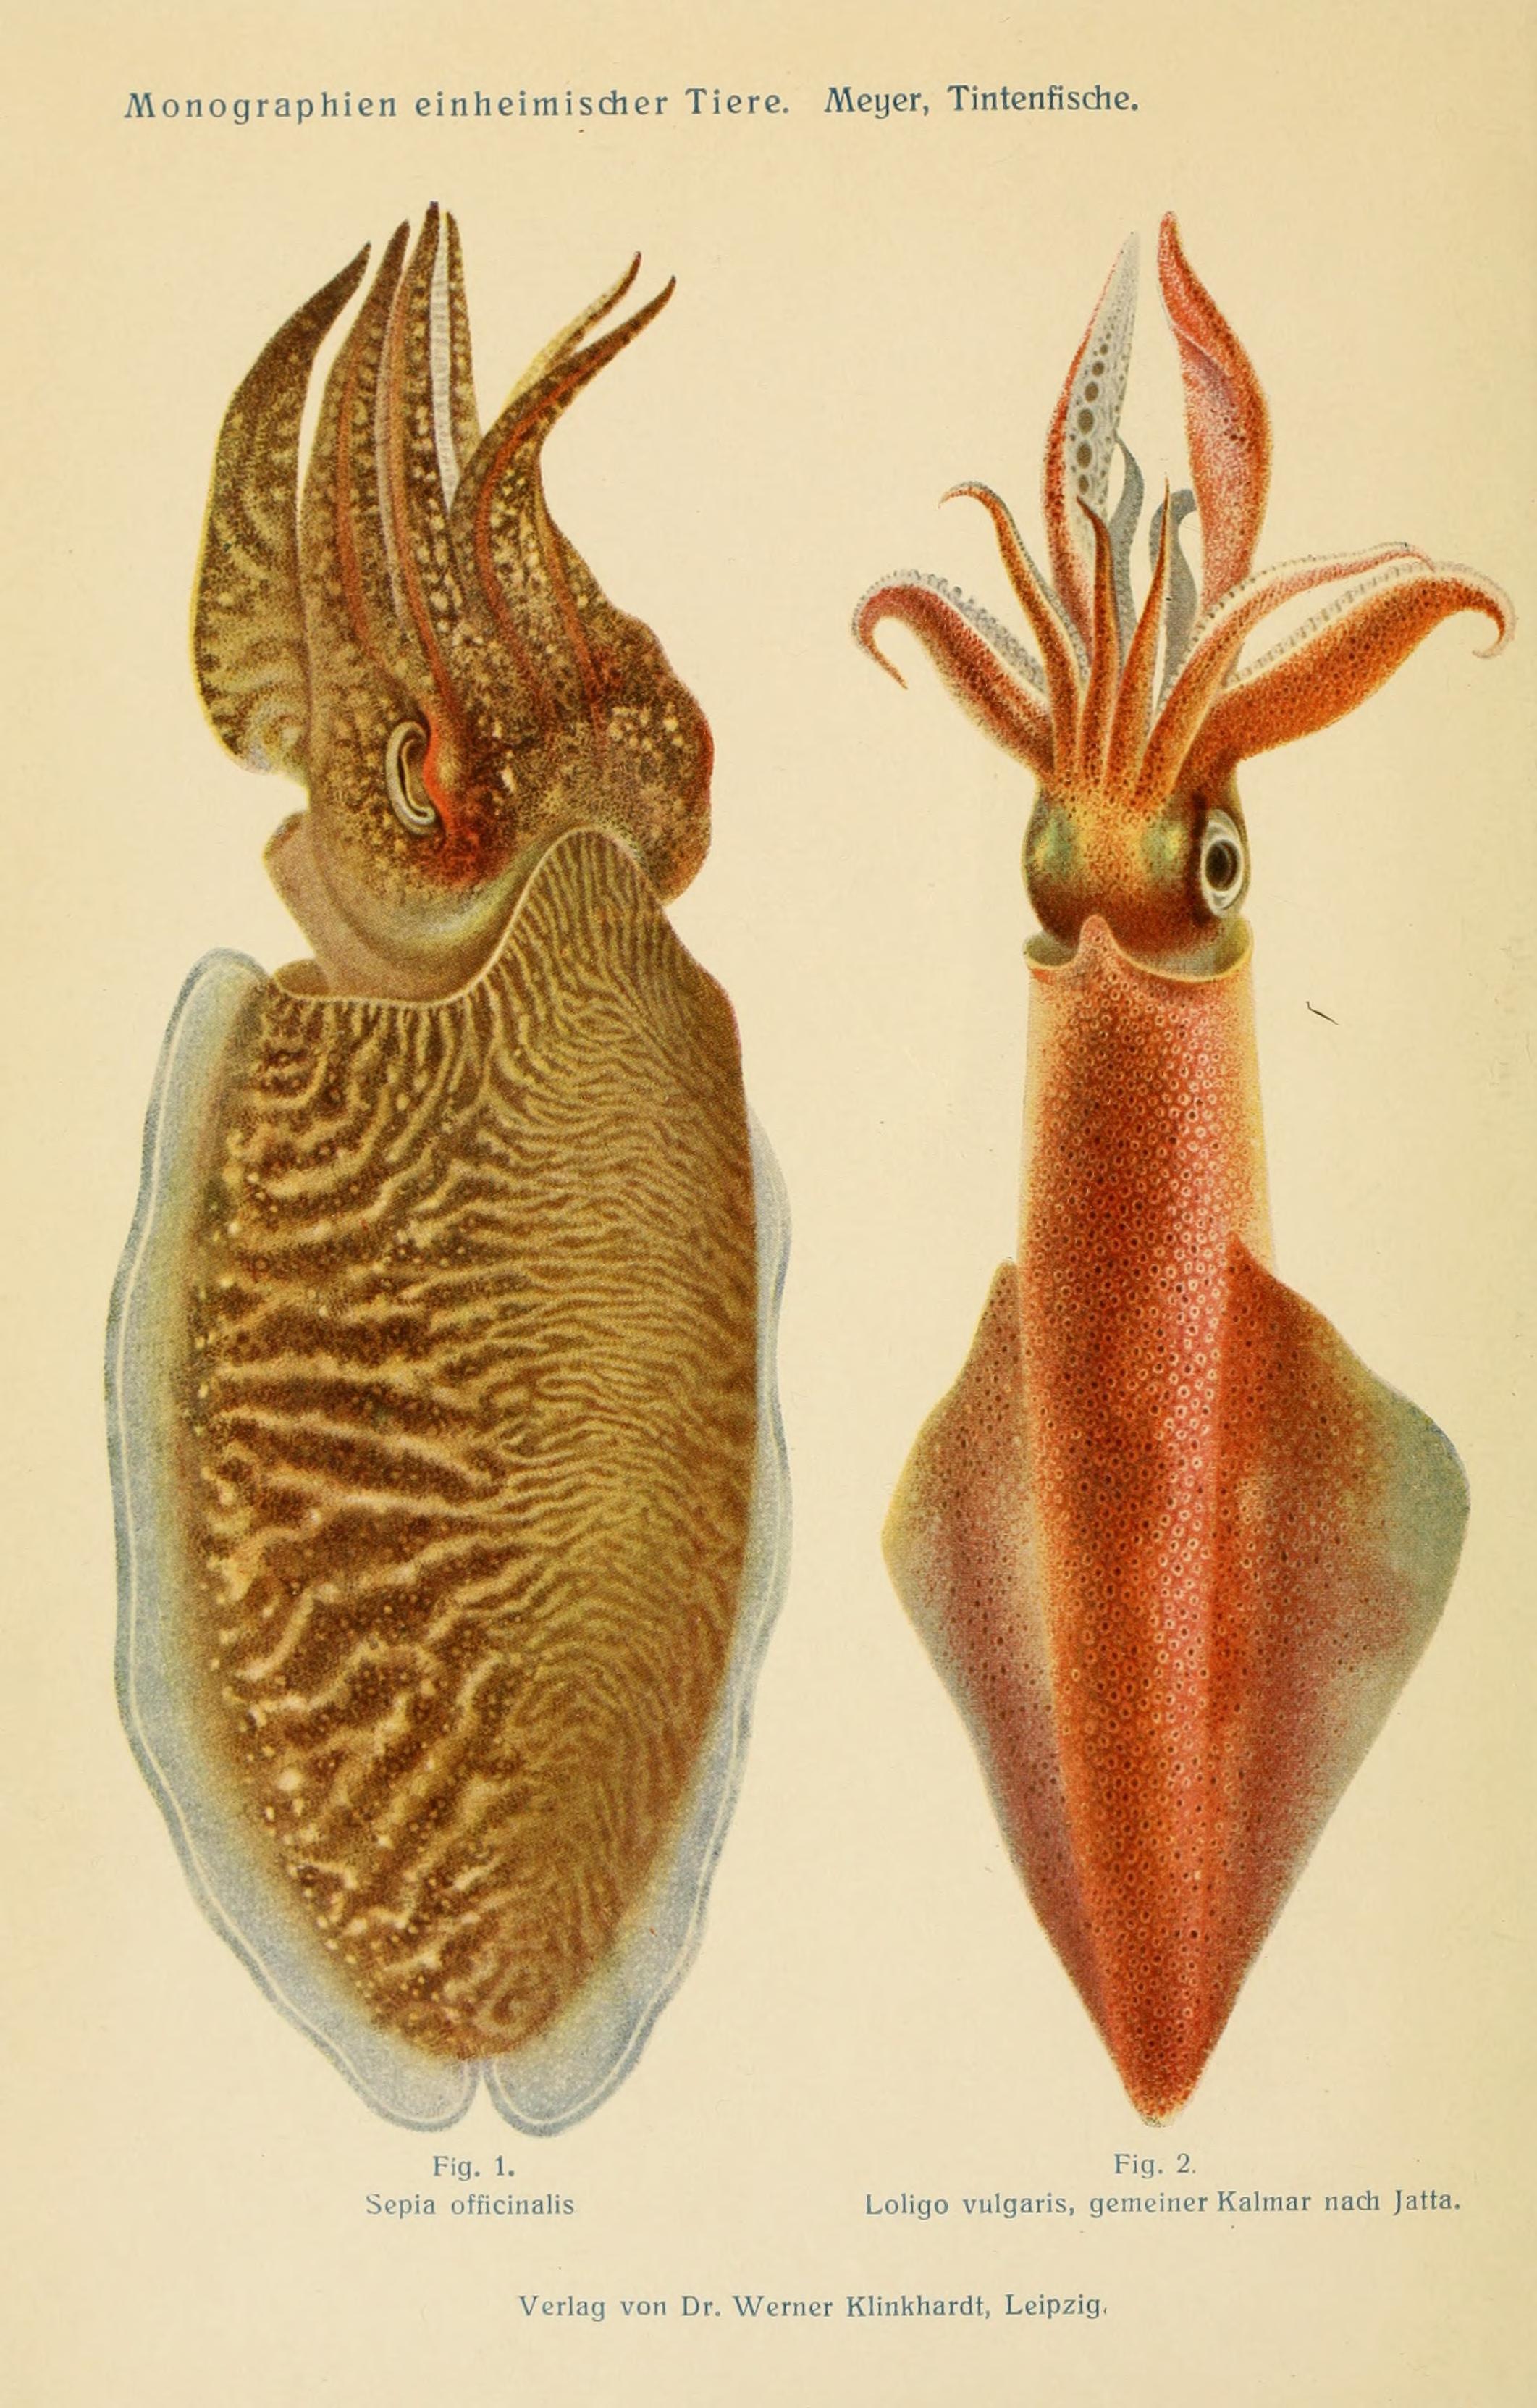 Image of Common Cuttlefish